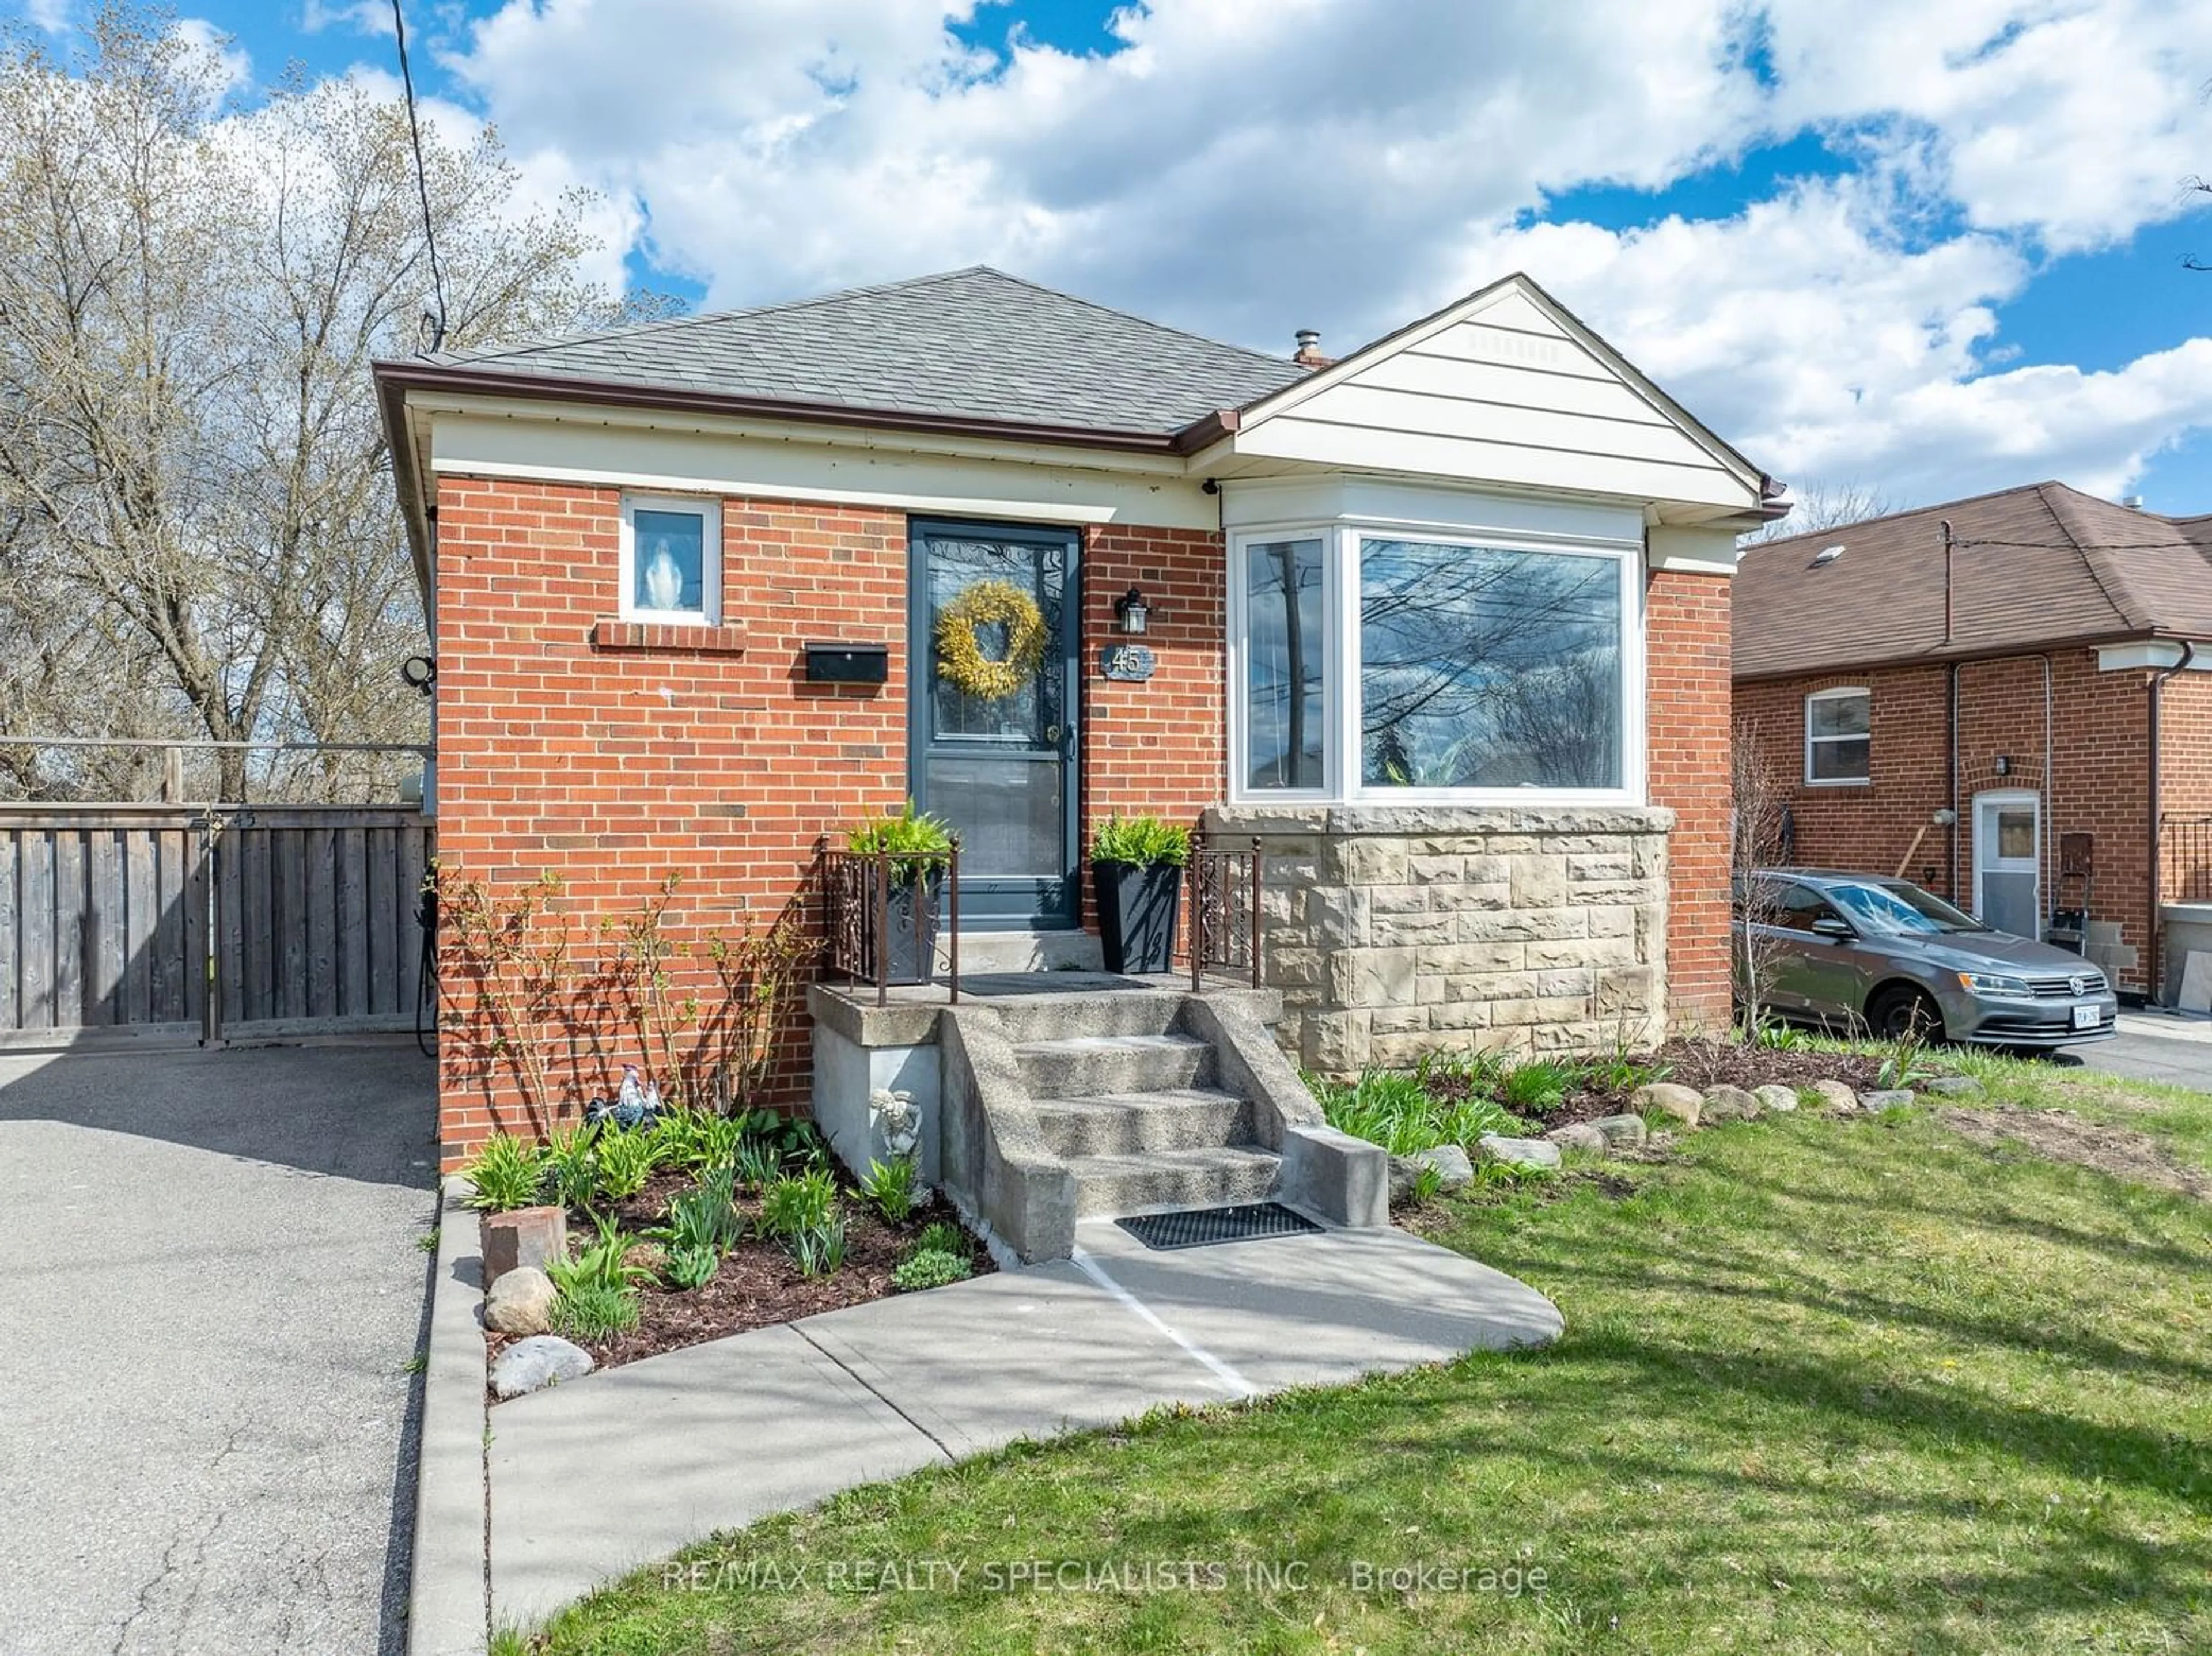 Home with brick exterior material for 45 Mayall Ave, Toronto Ontario M3L 1E7